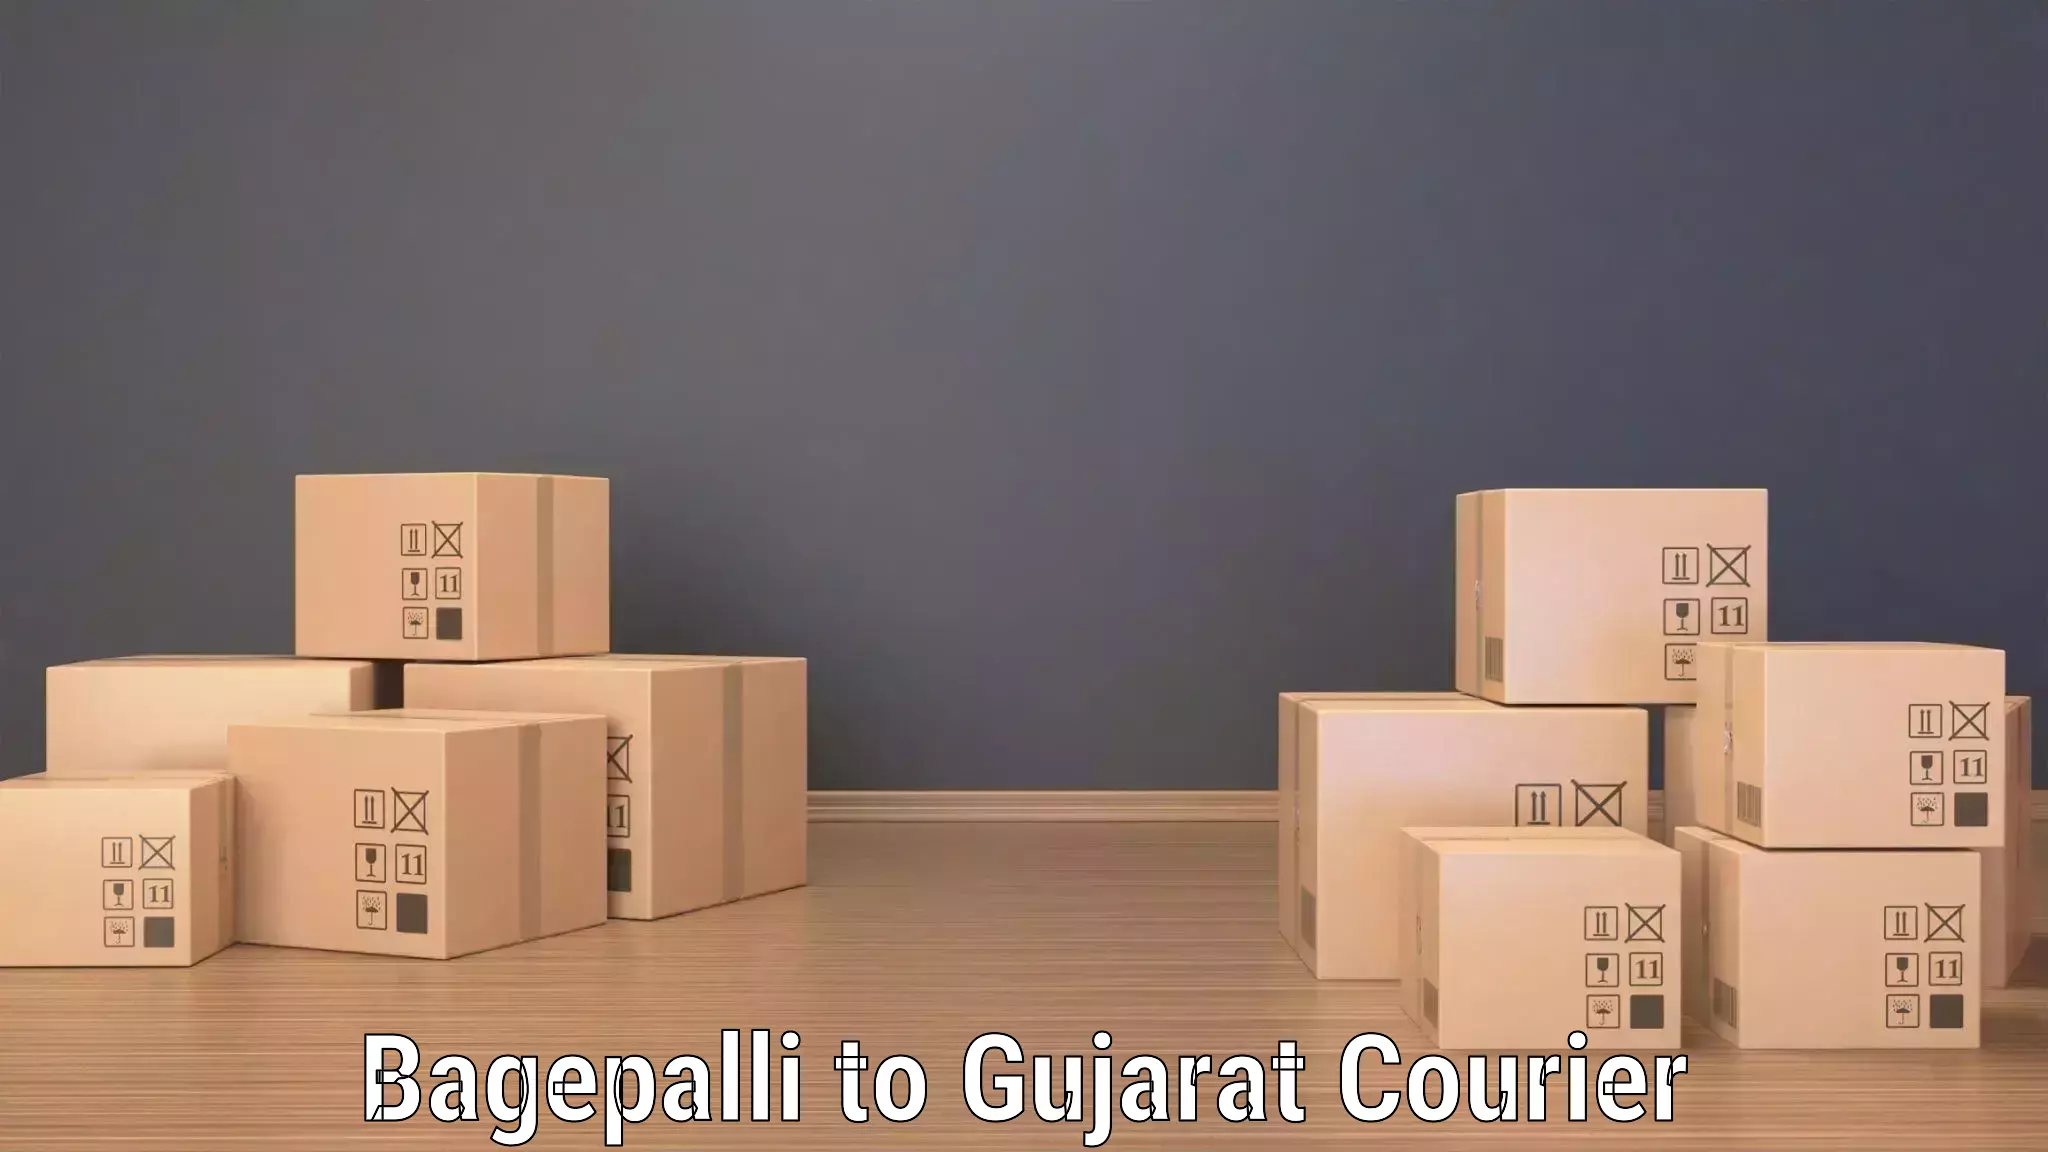 High-quality delivery services Bagepalli to GIDC